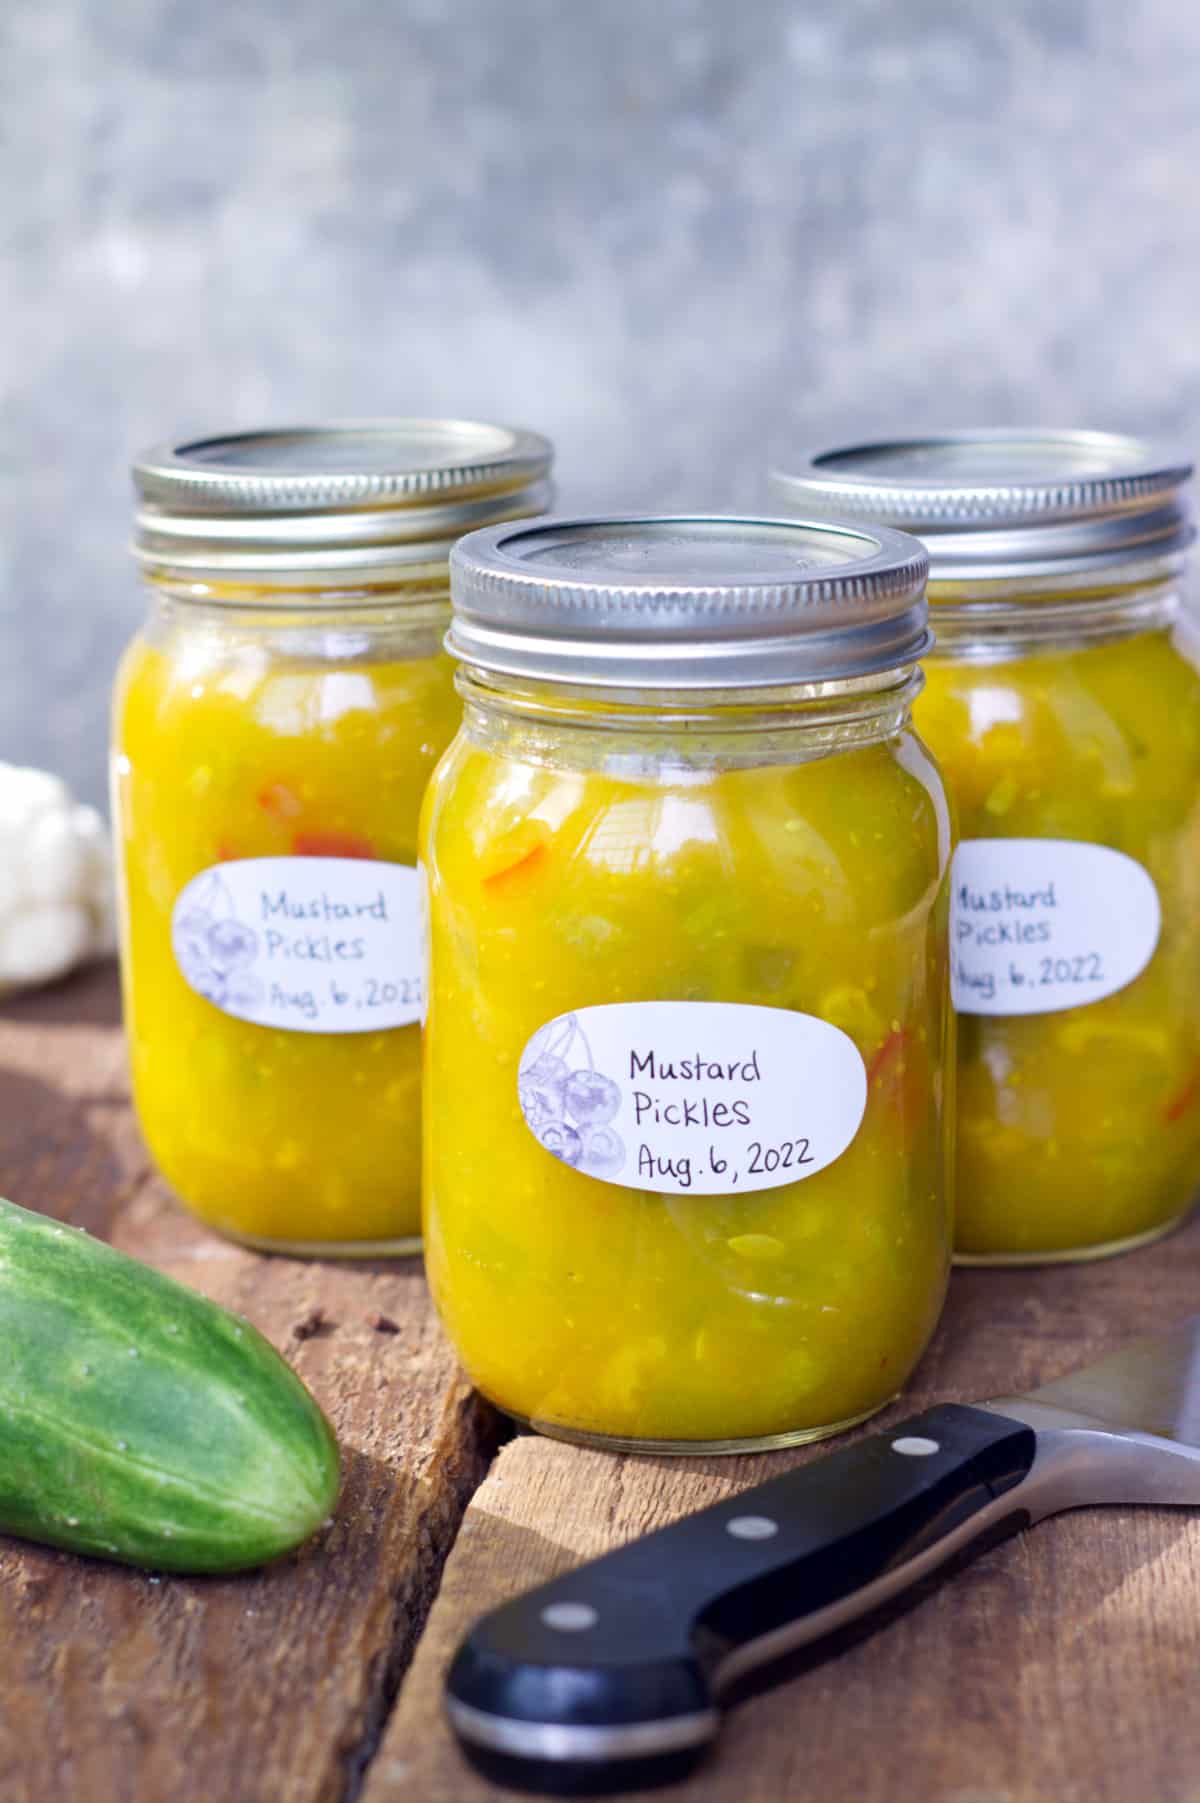 Three jars of fully processed, and labeled mustard pickles displayed on rustic wooden barn boards.